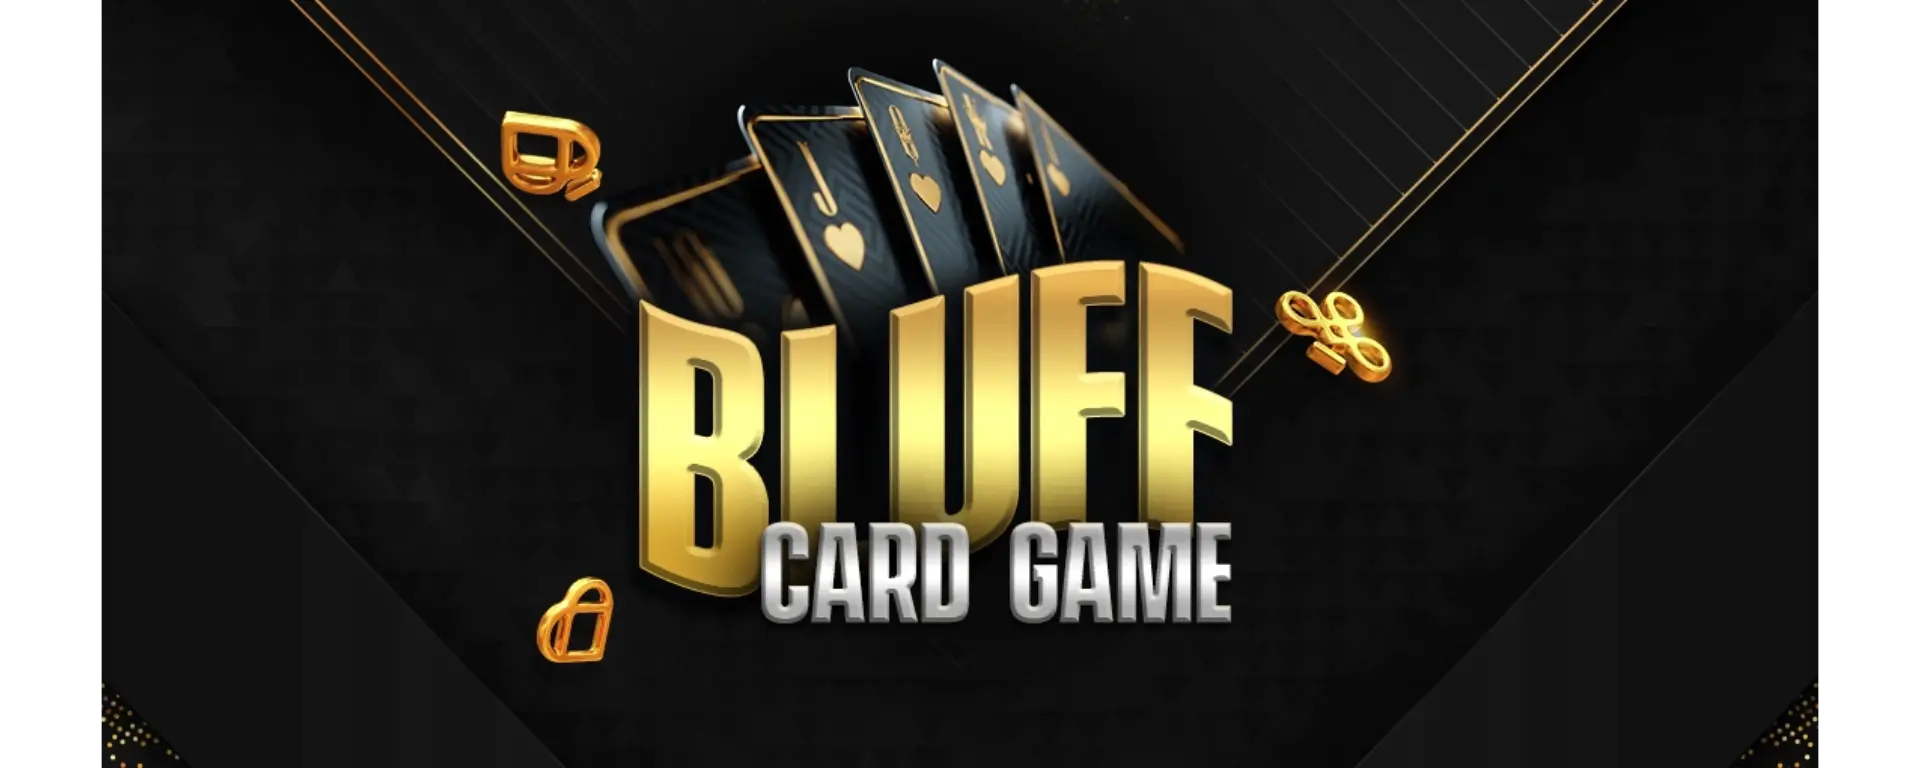 How to Play Bluff Card Game